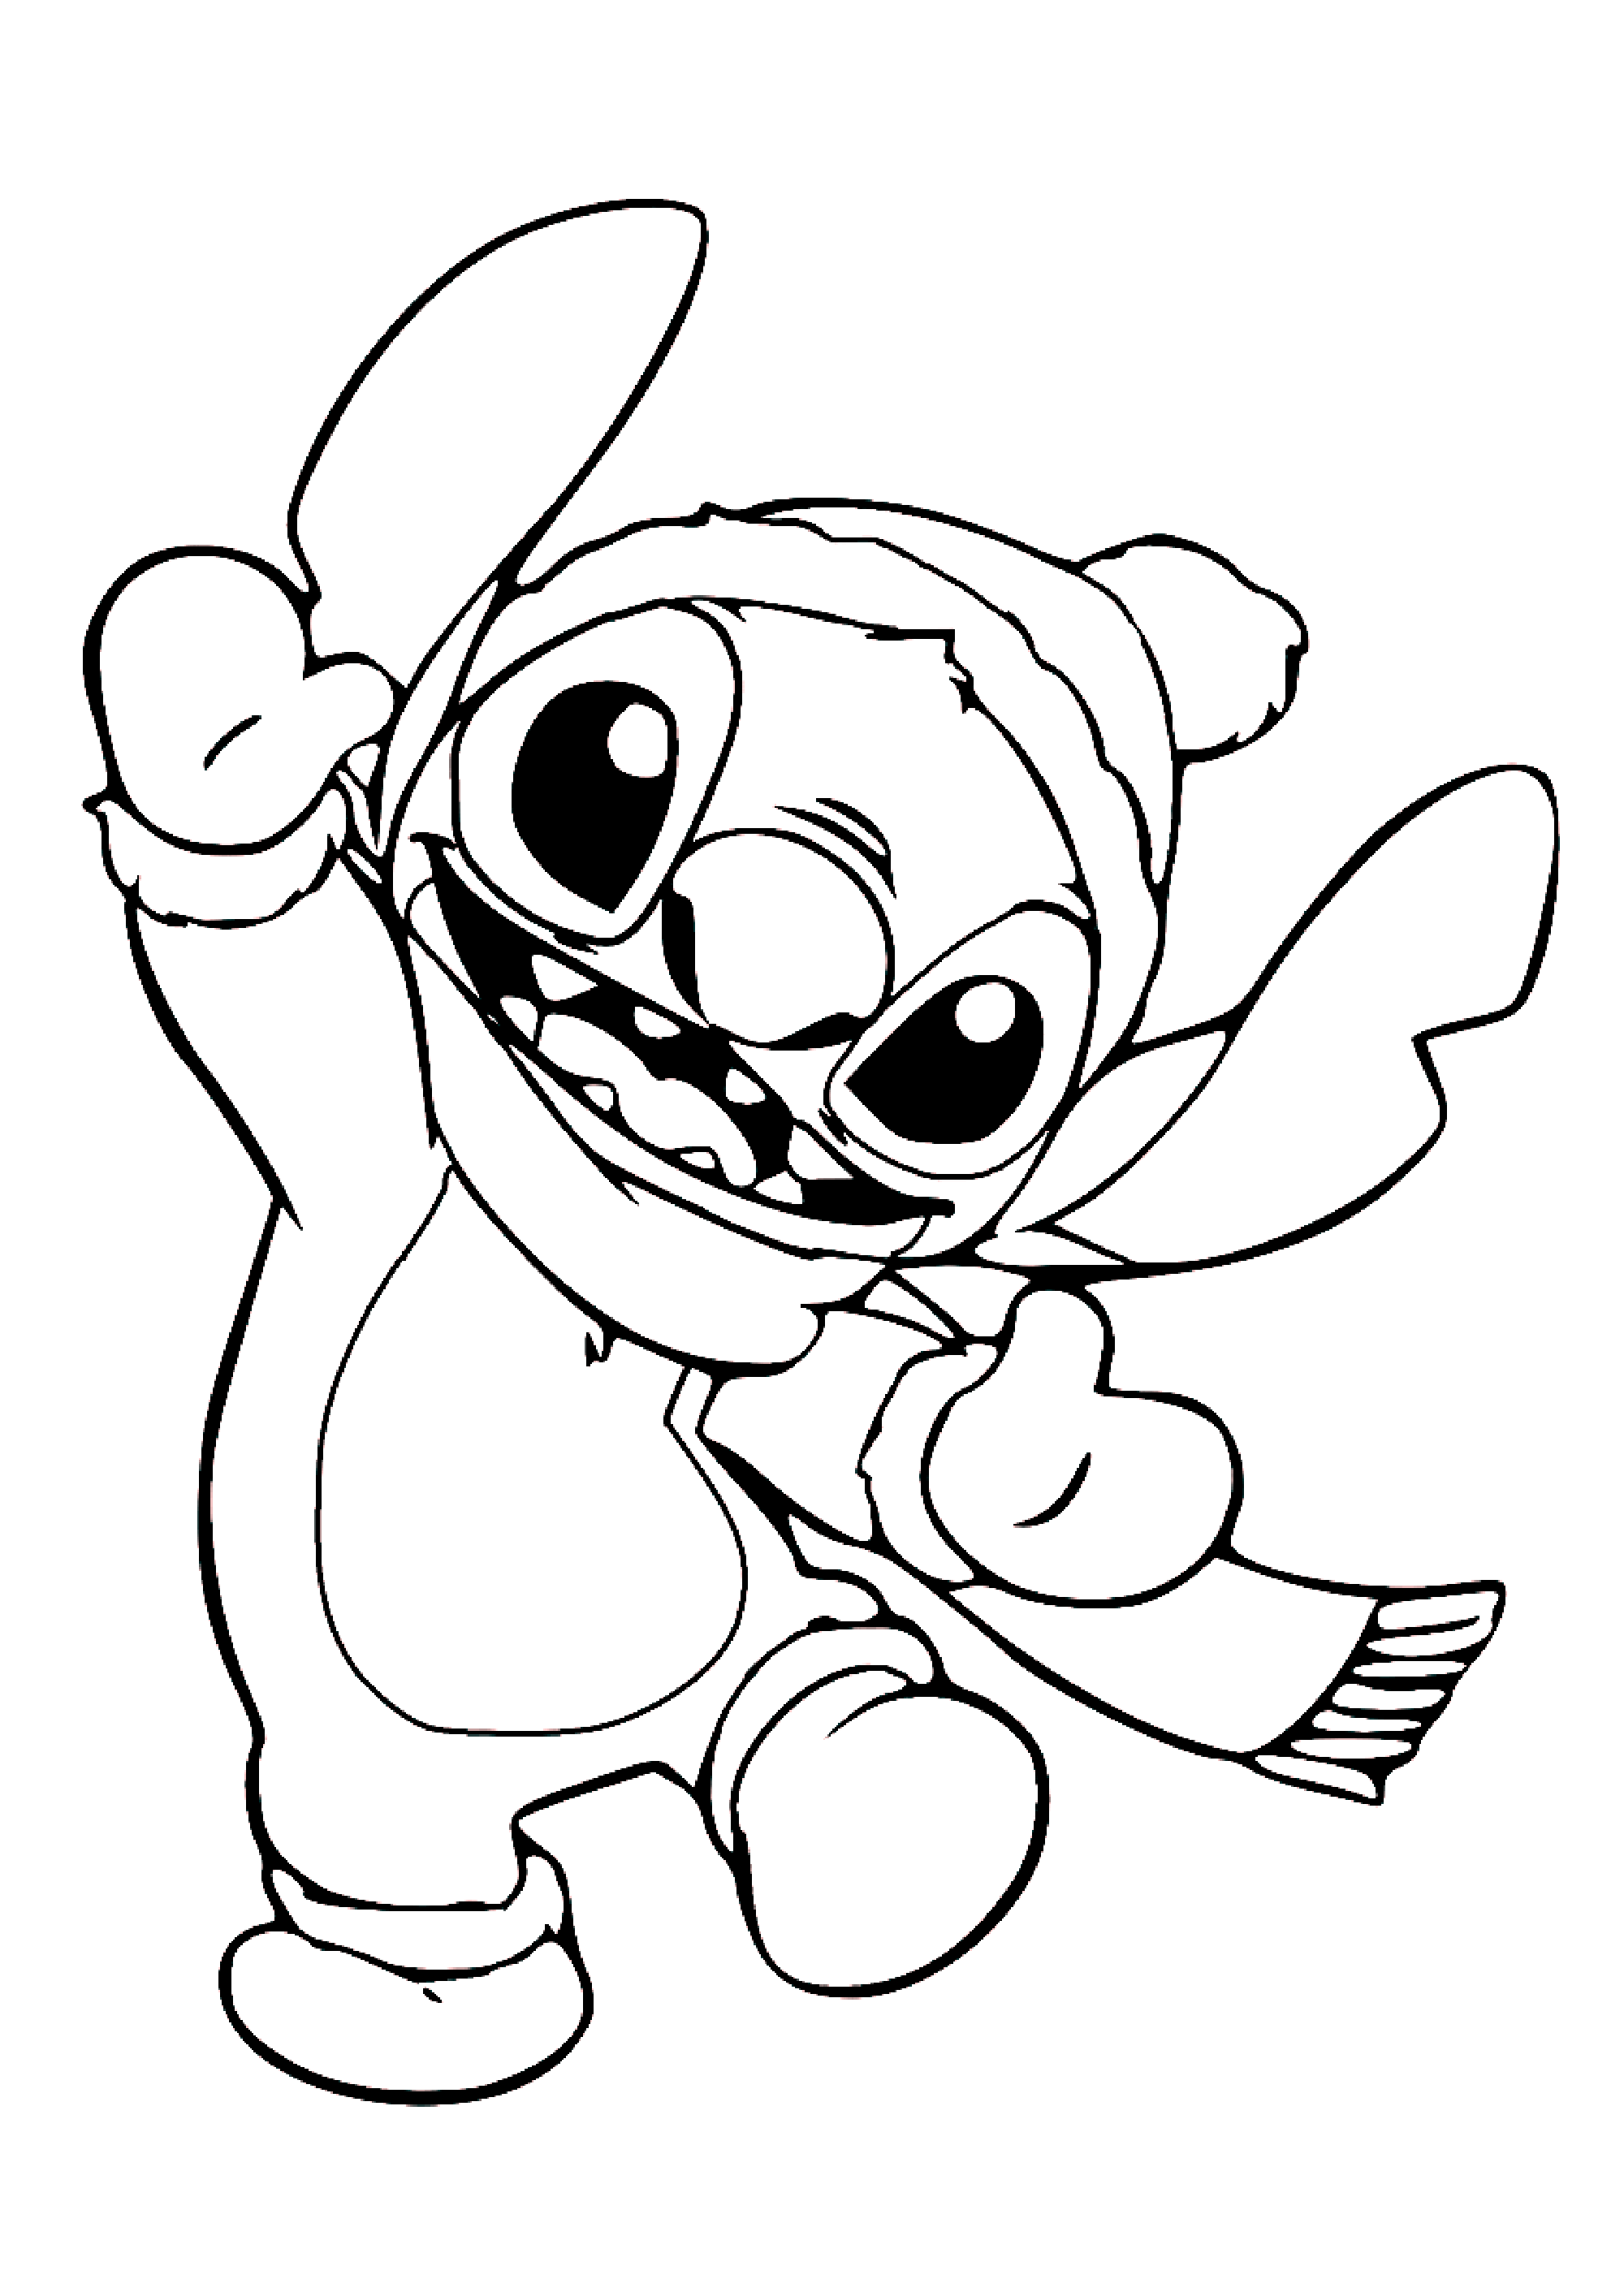 Lilo and stich for kids - Lilo And Stich Kids Coloring Pages